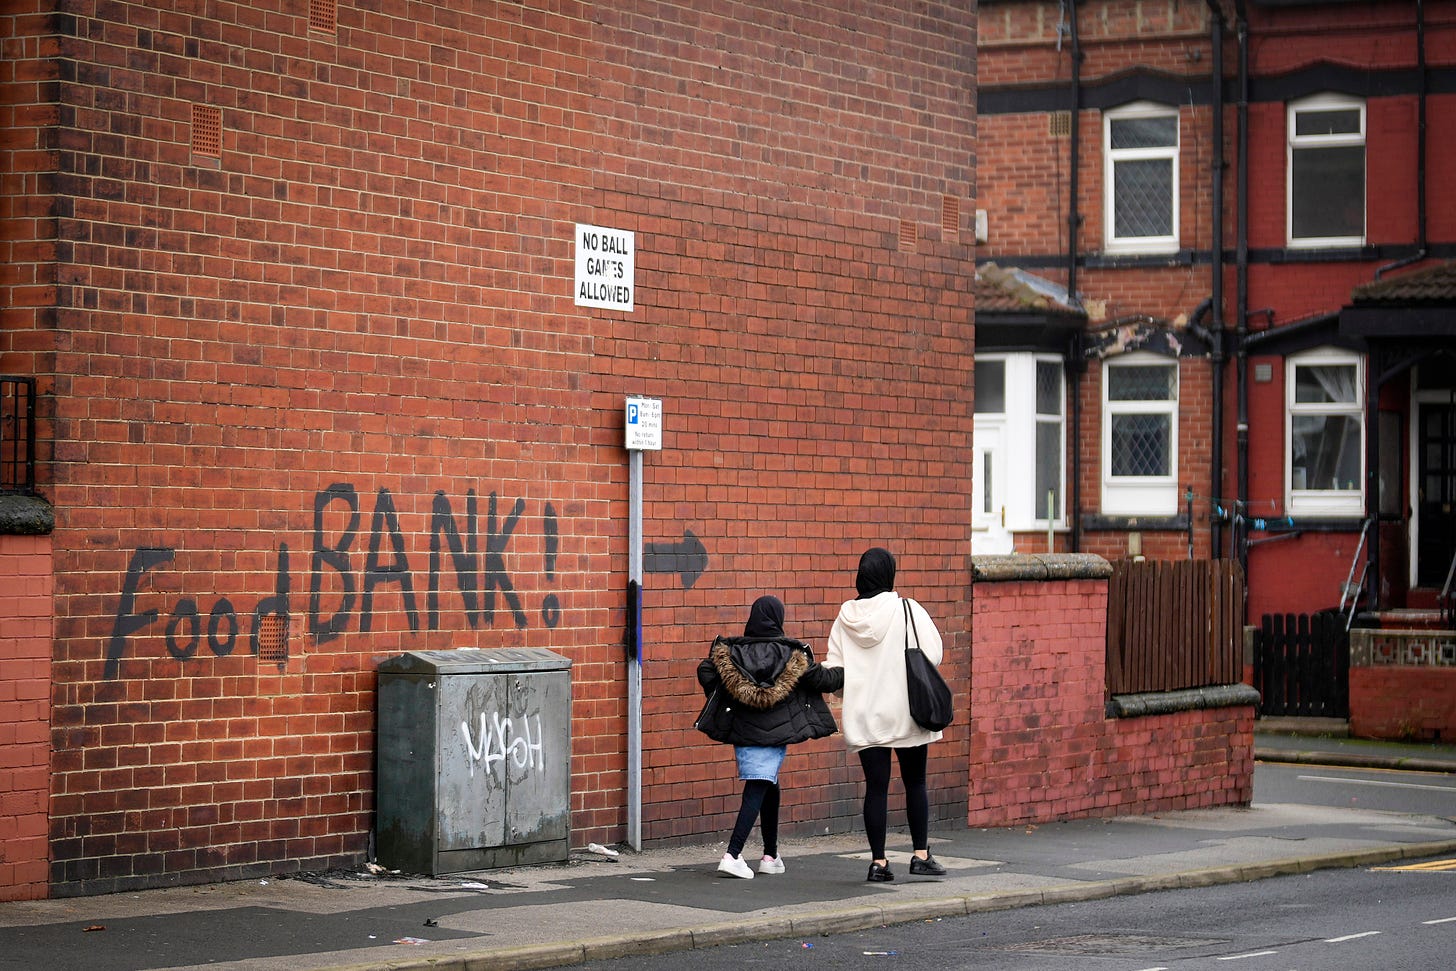 We call on this government to break the cycle of poverty | The Independent